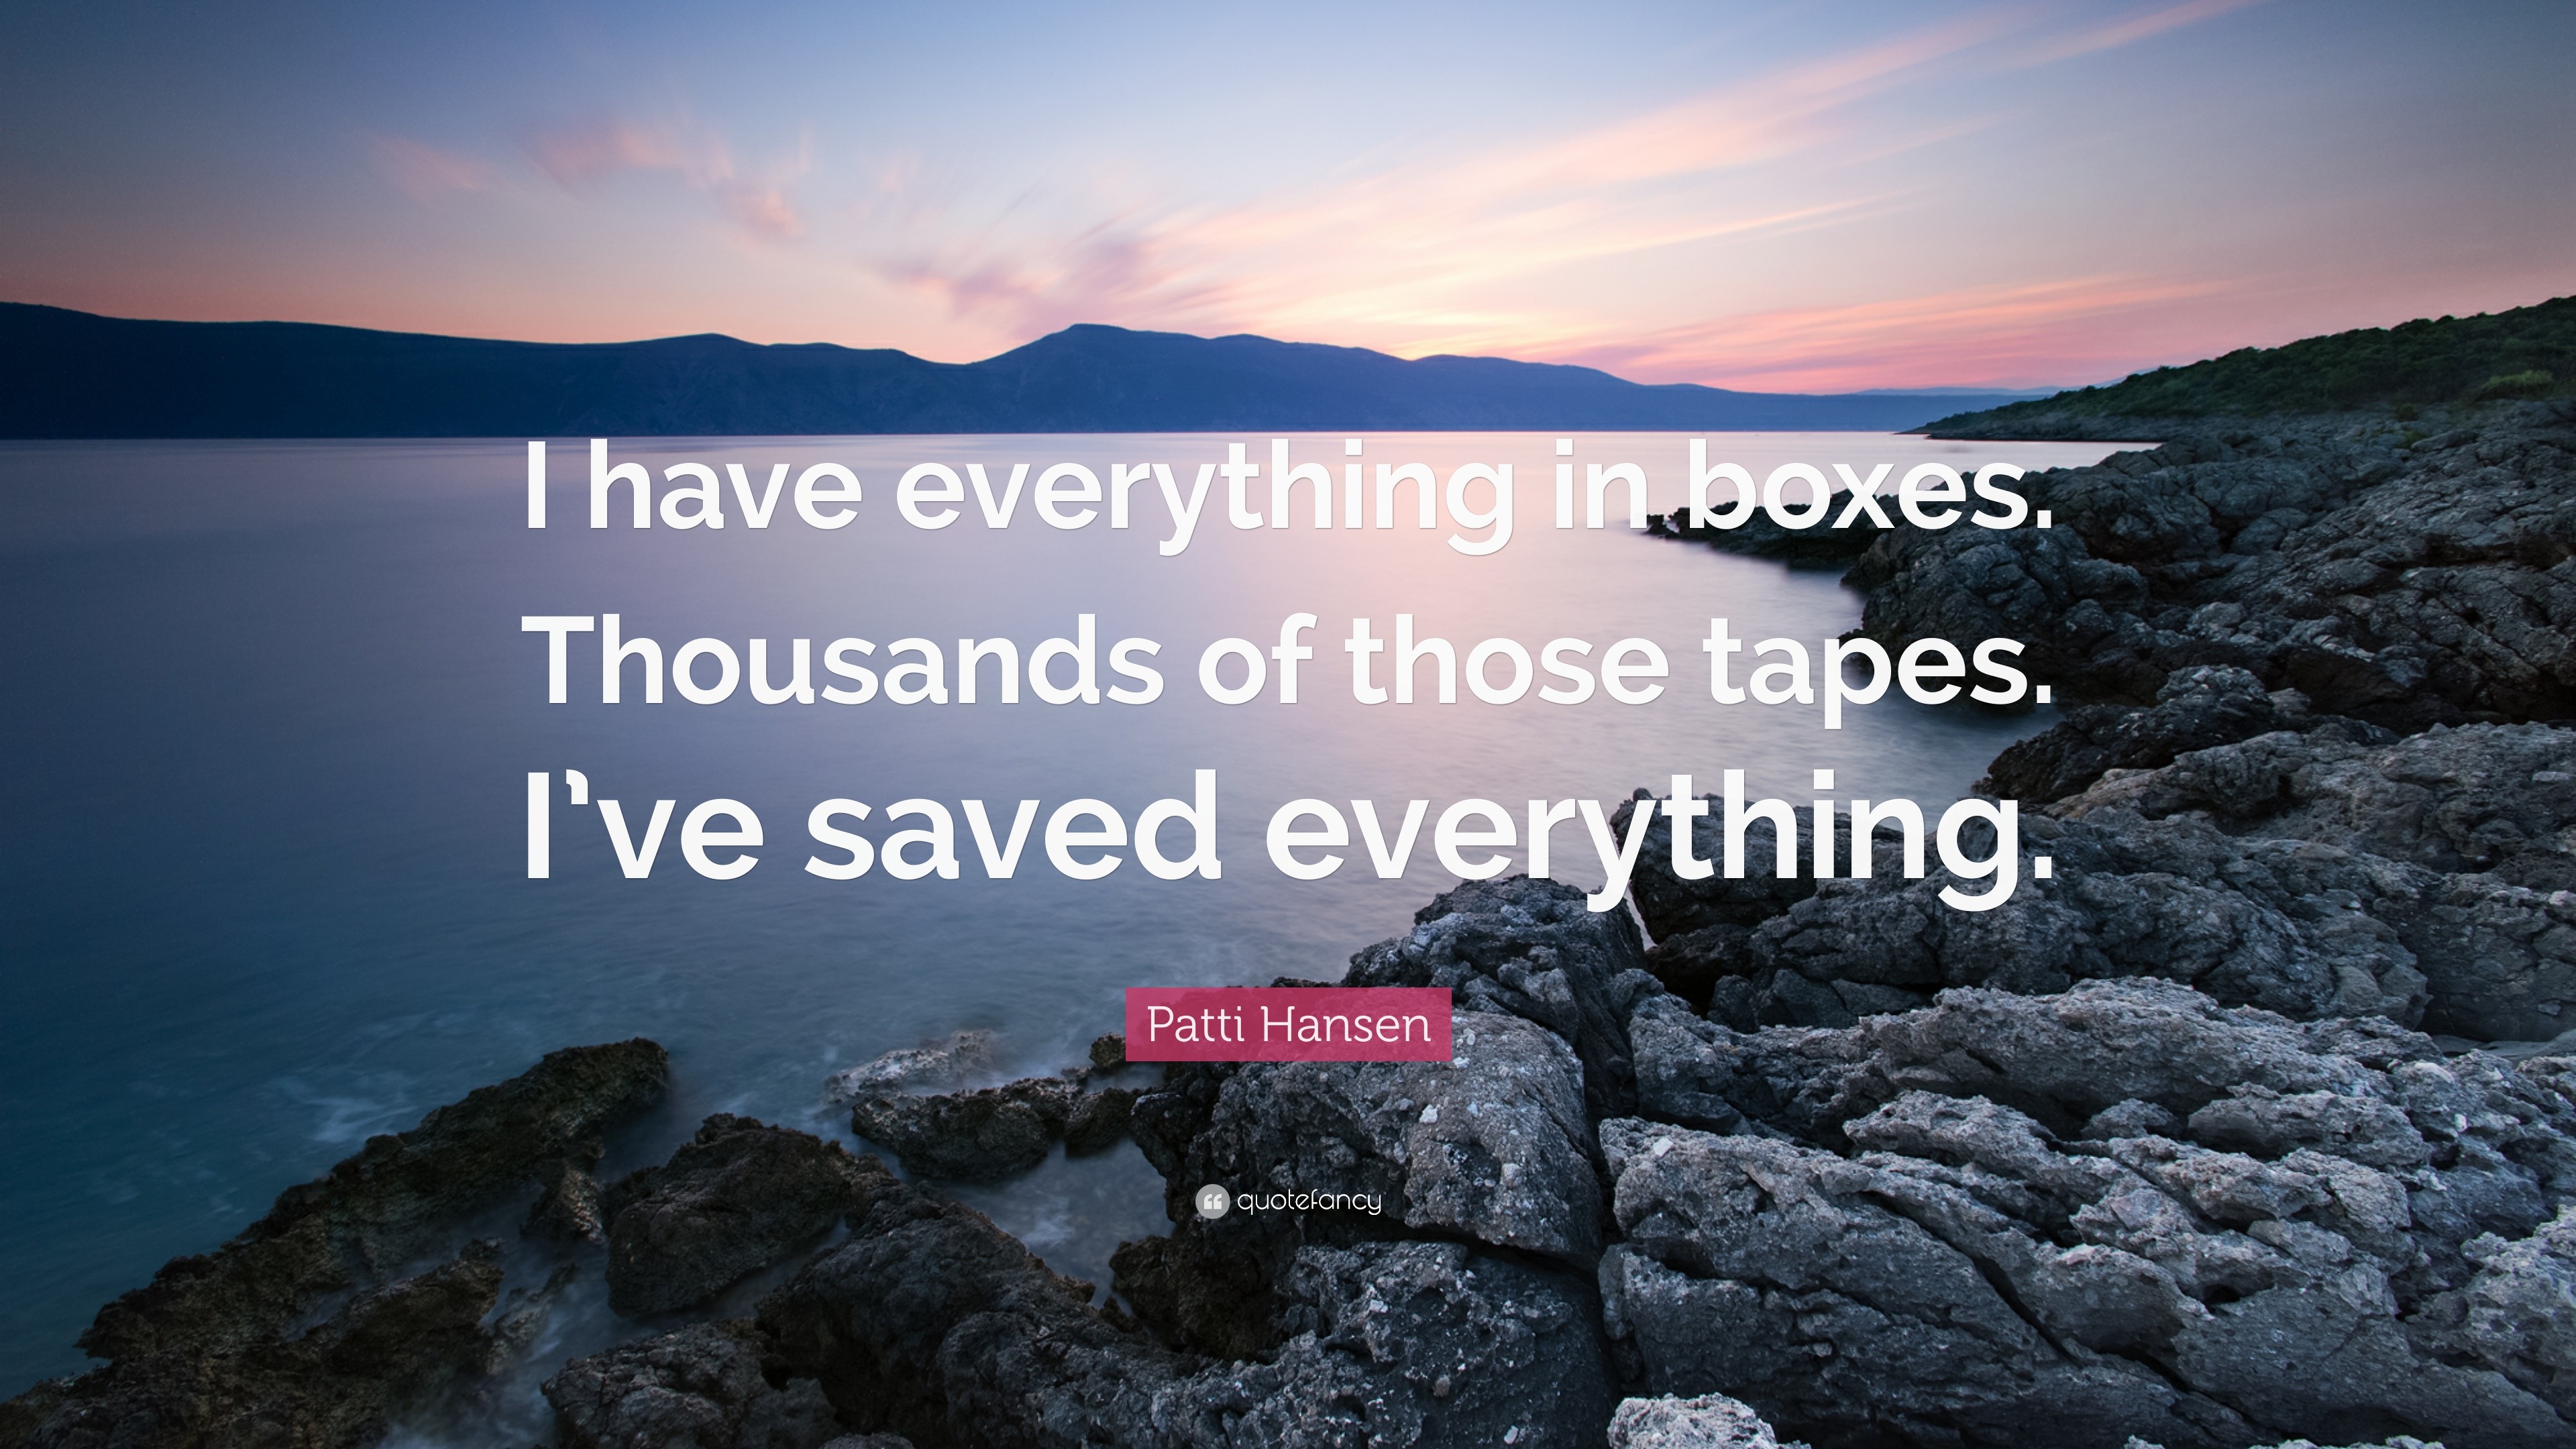 Patti Hansen Quote “i Have Everything In Boxes Thousands Of Those Tapes Ive Saved Everything” 